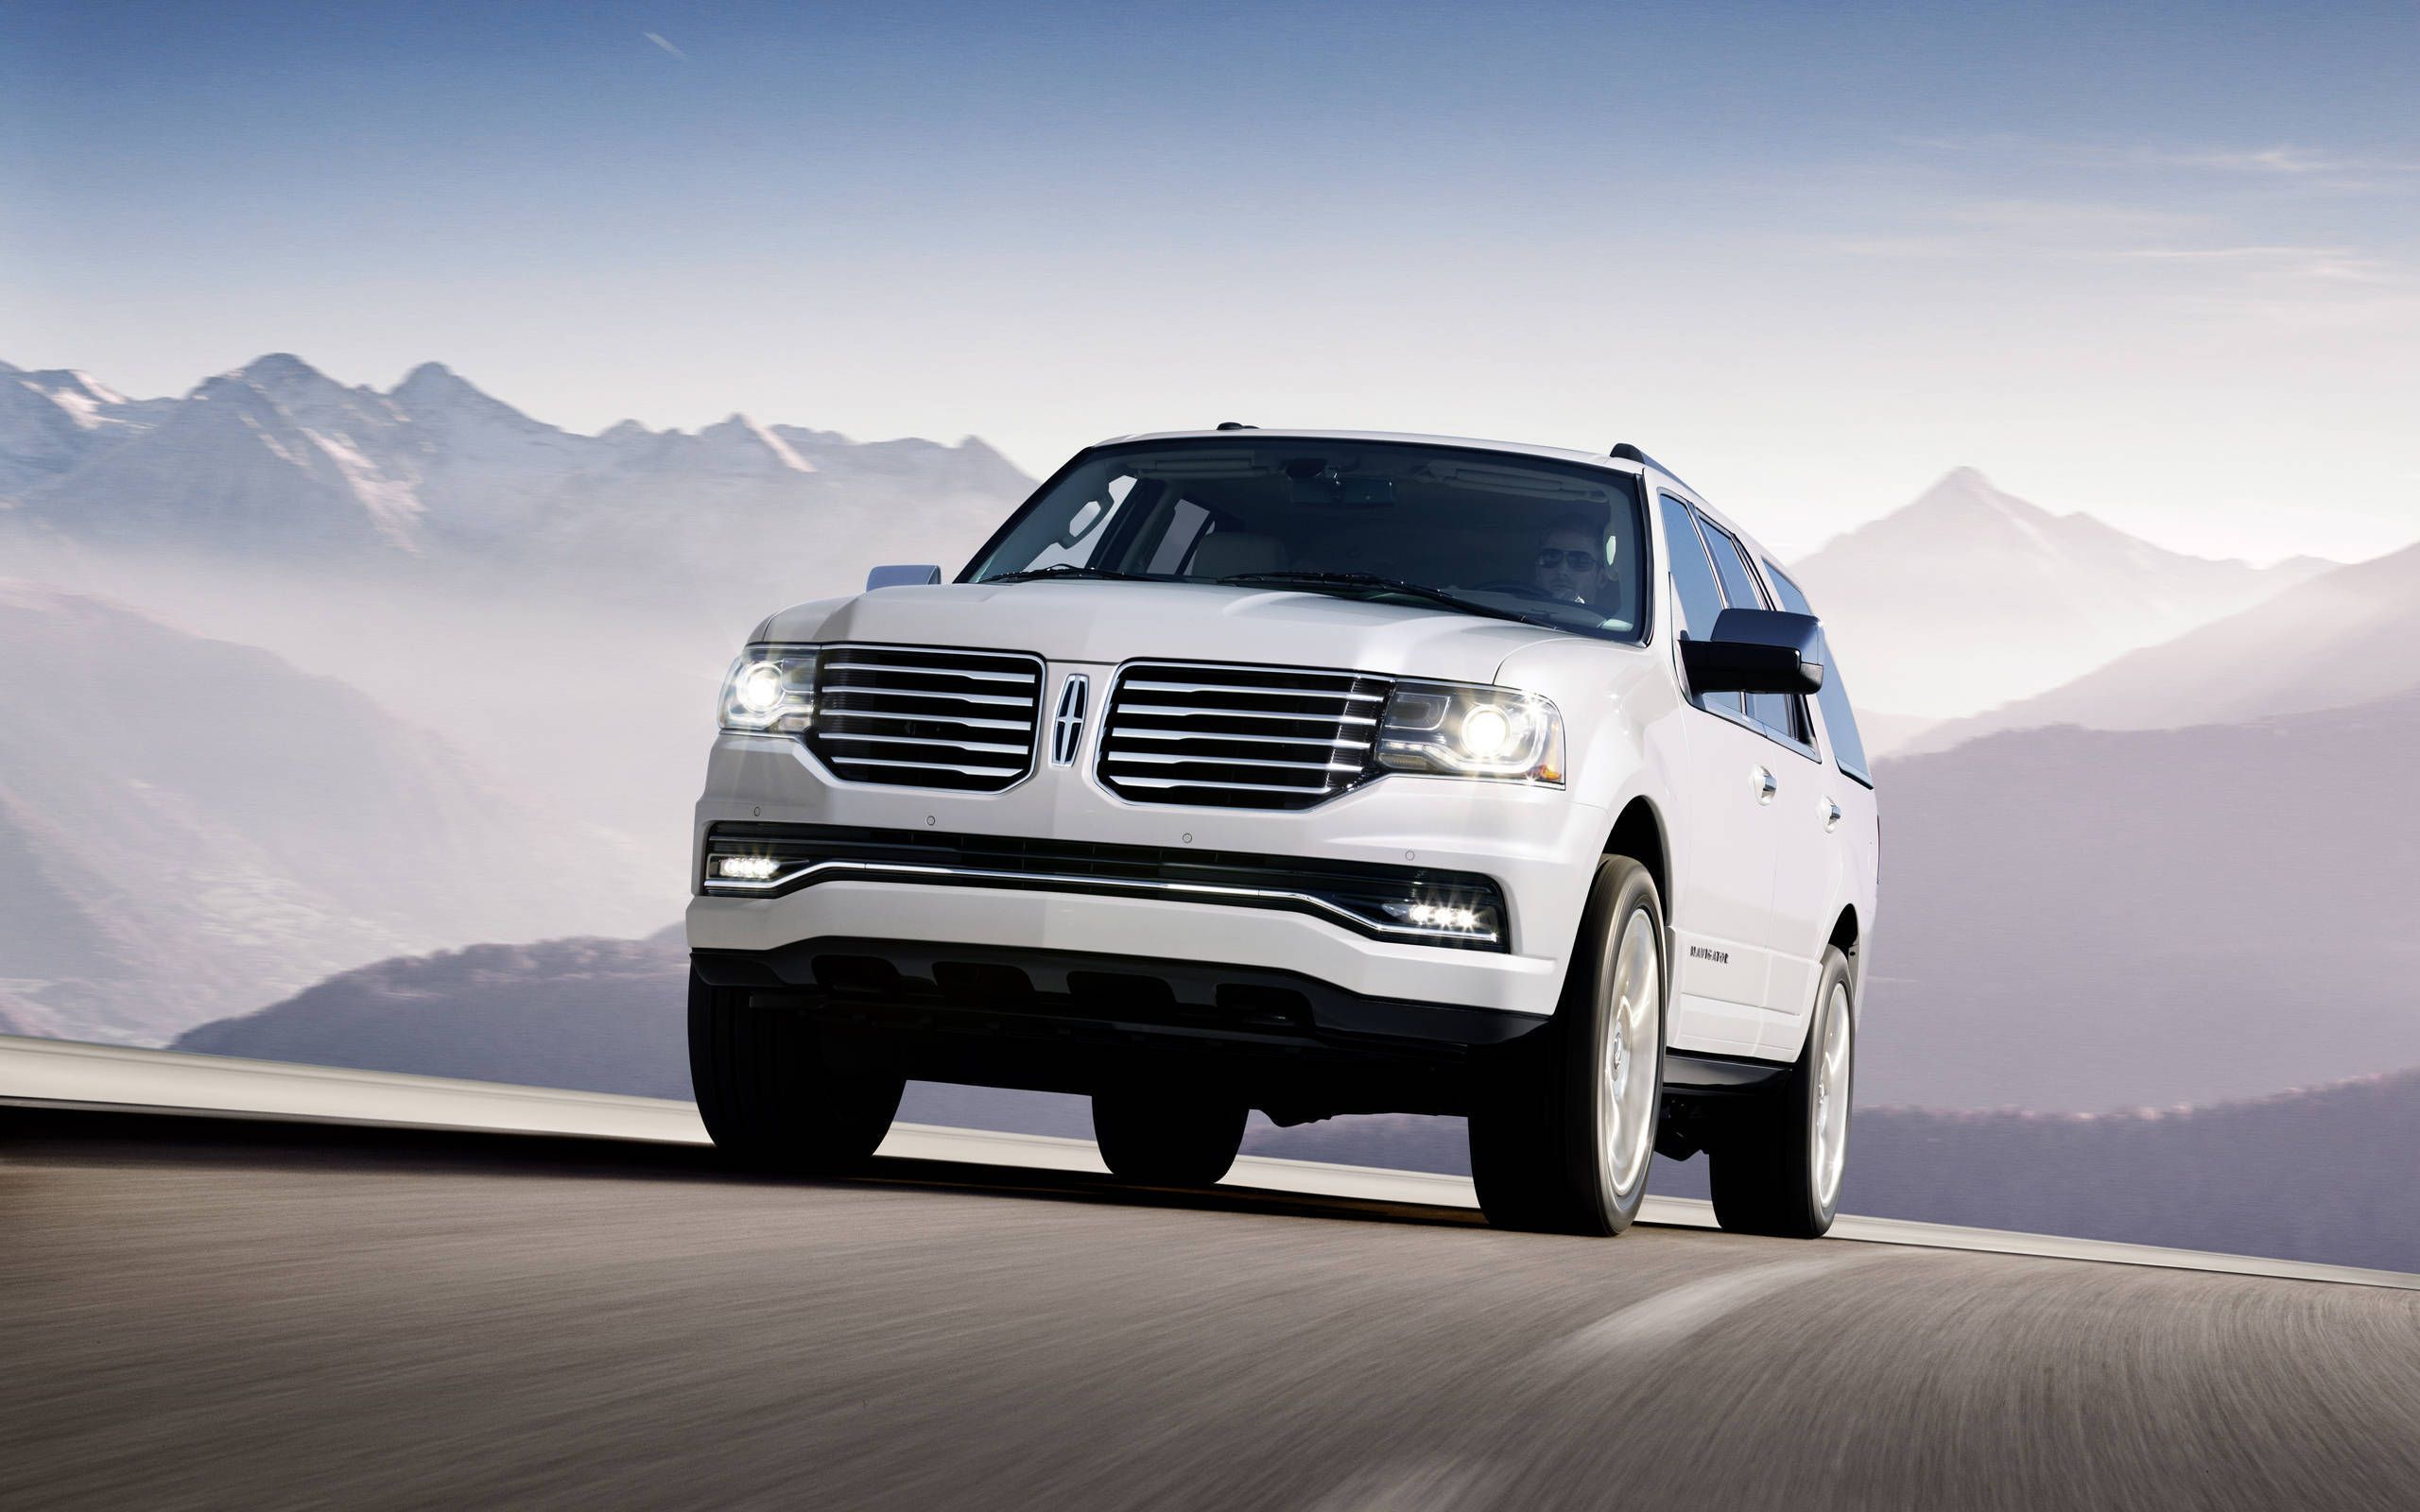 2015 Lincoln Navigator L review notes